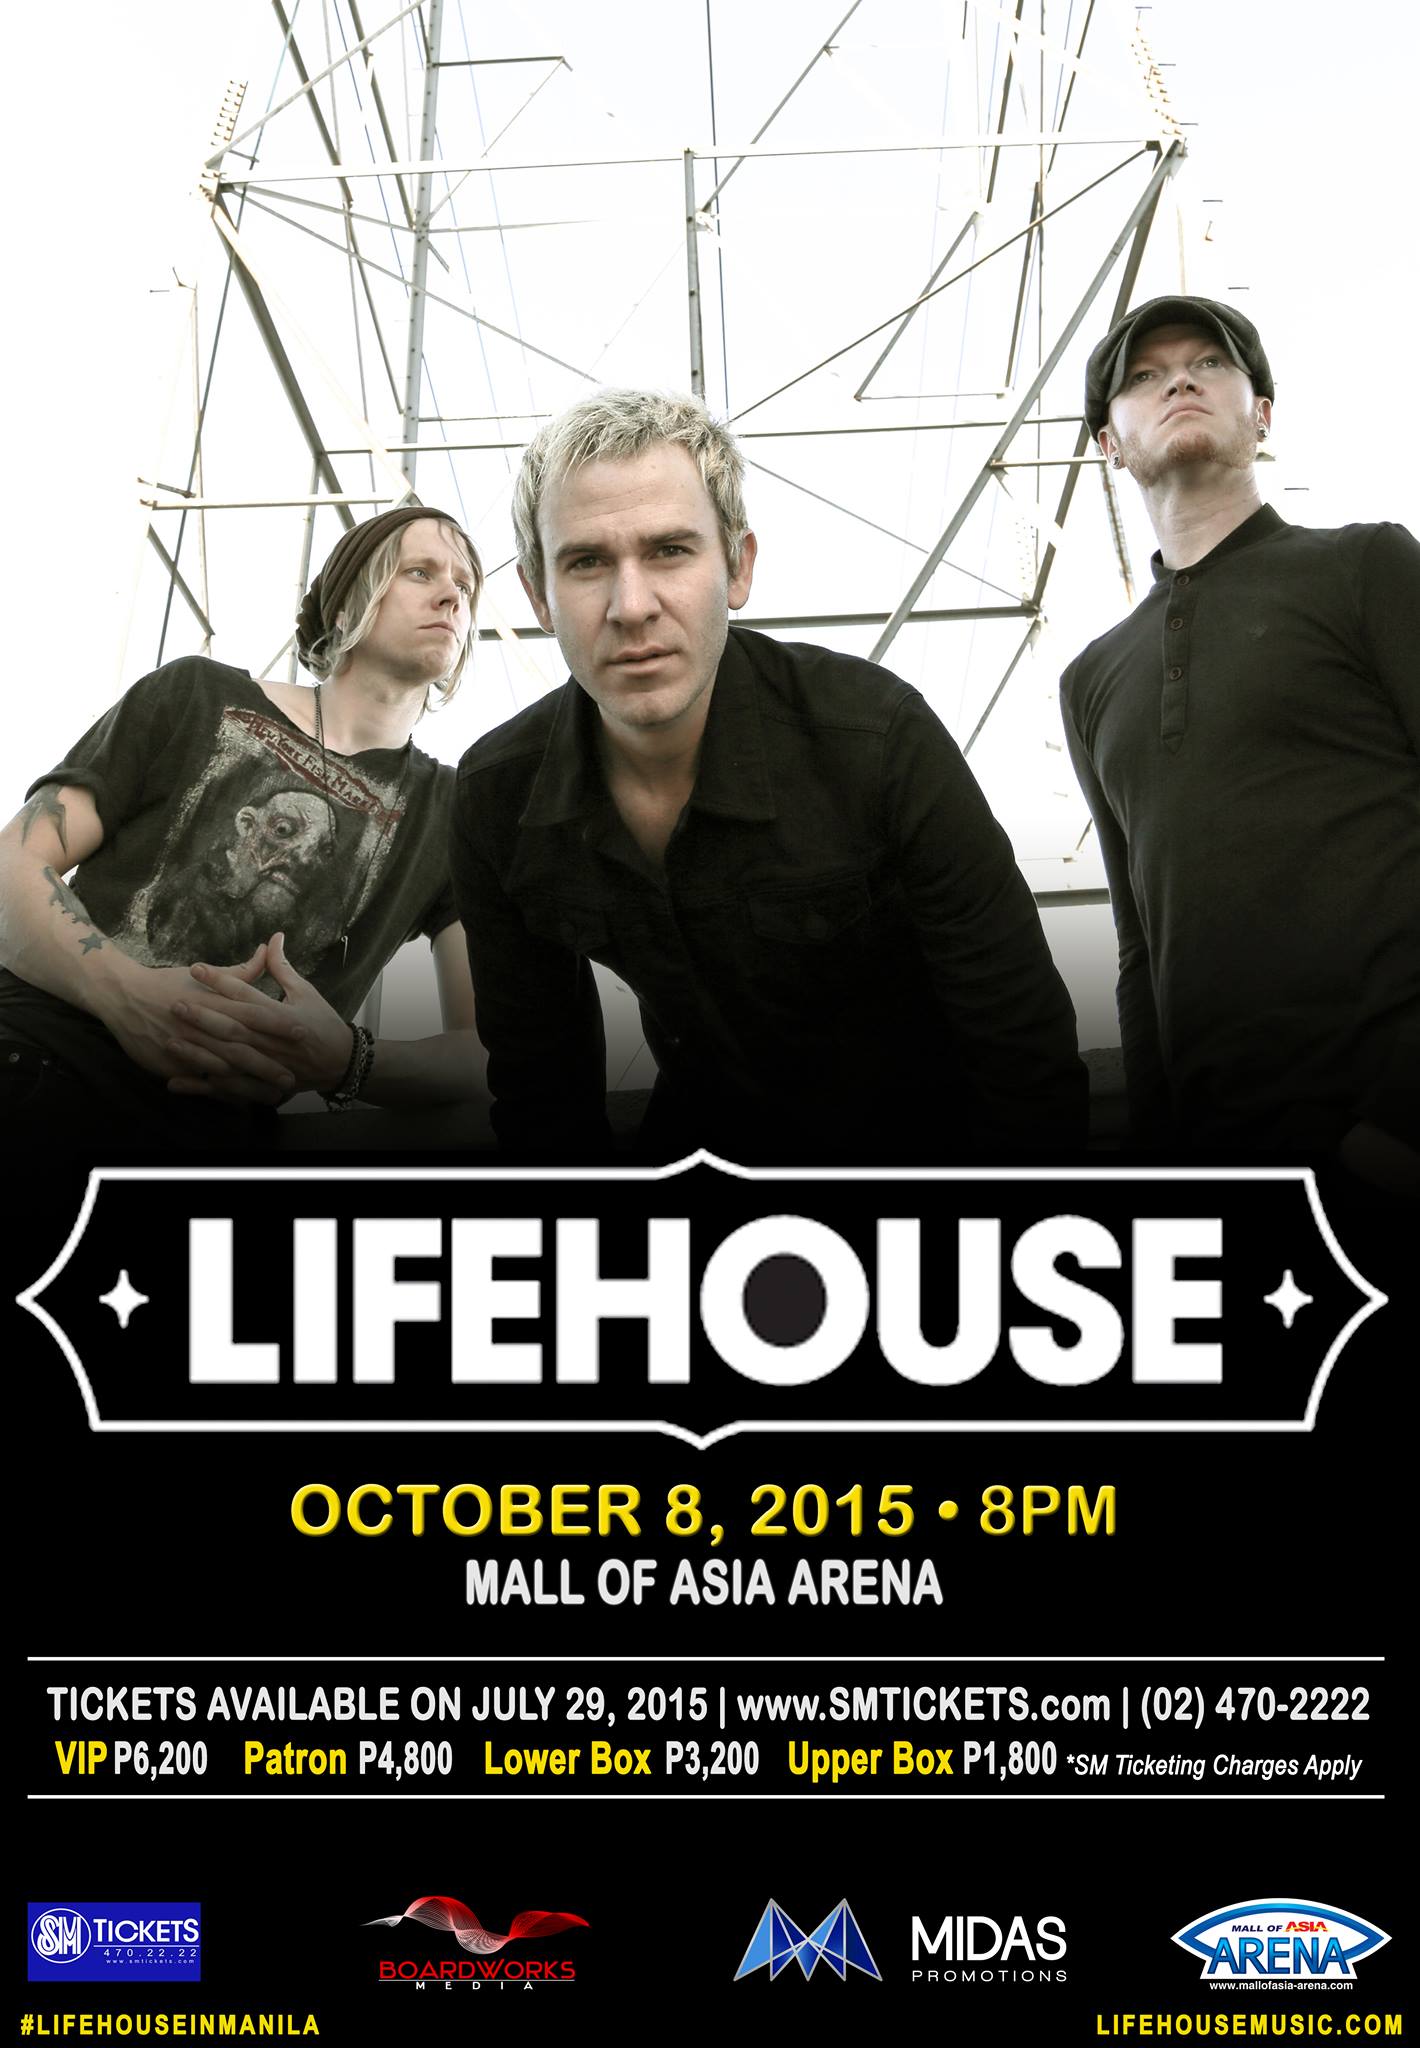 Lifehouse Live in Manila 2015 Thursday, October 8 at 8:00pm Show Map Mall of Asia Arena ], 1308 Manila, Philippines Find Tickets Tickets Available www.smtickets.com The rock trio who have produced numerous hit songs and multi-platinum albums returns this 8th October! It's Lifehouse, Live in Manila at the Mall of Asia Arena in Pasay City. For ticket info go to www.SMtickets.com or call 470-2222. Tickets will be available starting July 29, 2015. Get to hear their greatest songs such as Hanging By A Moment, Everything, You and Me, Sick Cycle Carousel, and a whole lot more. They will be performing live for one night only, as they resurface for their Filipino fans this 8th of October 2015. With the new album Out of the Wasteland, Jason Wade, Rick Woolstenhulme, Jr. and Bryce Soderberg are back with their blend of pop/rock melodies. For more info on the band go to www.lifehousemusic.com ----- Lifehouse Live In Manila Thursday, October 8 at 8:00pm Next Week Show Map Mall of Asia Arena Pasay City, 1308 Manila, Philippines Boardworks Media and Midas Promotions presents LIFEHOUSE Live in Manila! October 8, 2015 - 8:00pm Mall of Asia Arena, Pasay City TICKET PRICES(inclusive of SM Tickets Service Charge) VIP - P6,580 Patron - P5,090 Lower Box - P3,400 Upper Box - P1,910 *all sections are reserved seating Tickets are now available at all SM Tickets outlets nationwide and through online at www.smtickets.com. Call 470.2222 for ticket inquiries. LINKS https://www.facebook.com/lifehouse http://www.lifehousemusic.com/ https://smtickets.com/events/view/3579 ----- Lifehouse Live In Manila 2015 Thursday, October 8 at 8:00pm Show Map Mall of Asia Arena Pasay City, 1308 Manila, Philippines Find Tickets Tickets Available smtickets.com For the 3rd time, Lifehouse will be in Manila for their new album - Out of the Wasteland. Tickets are now available at S